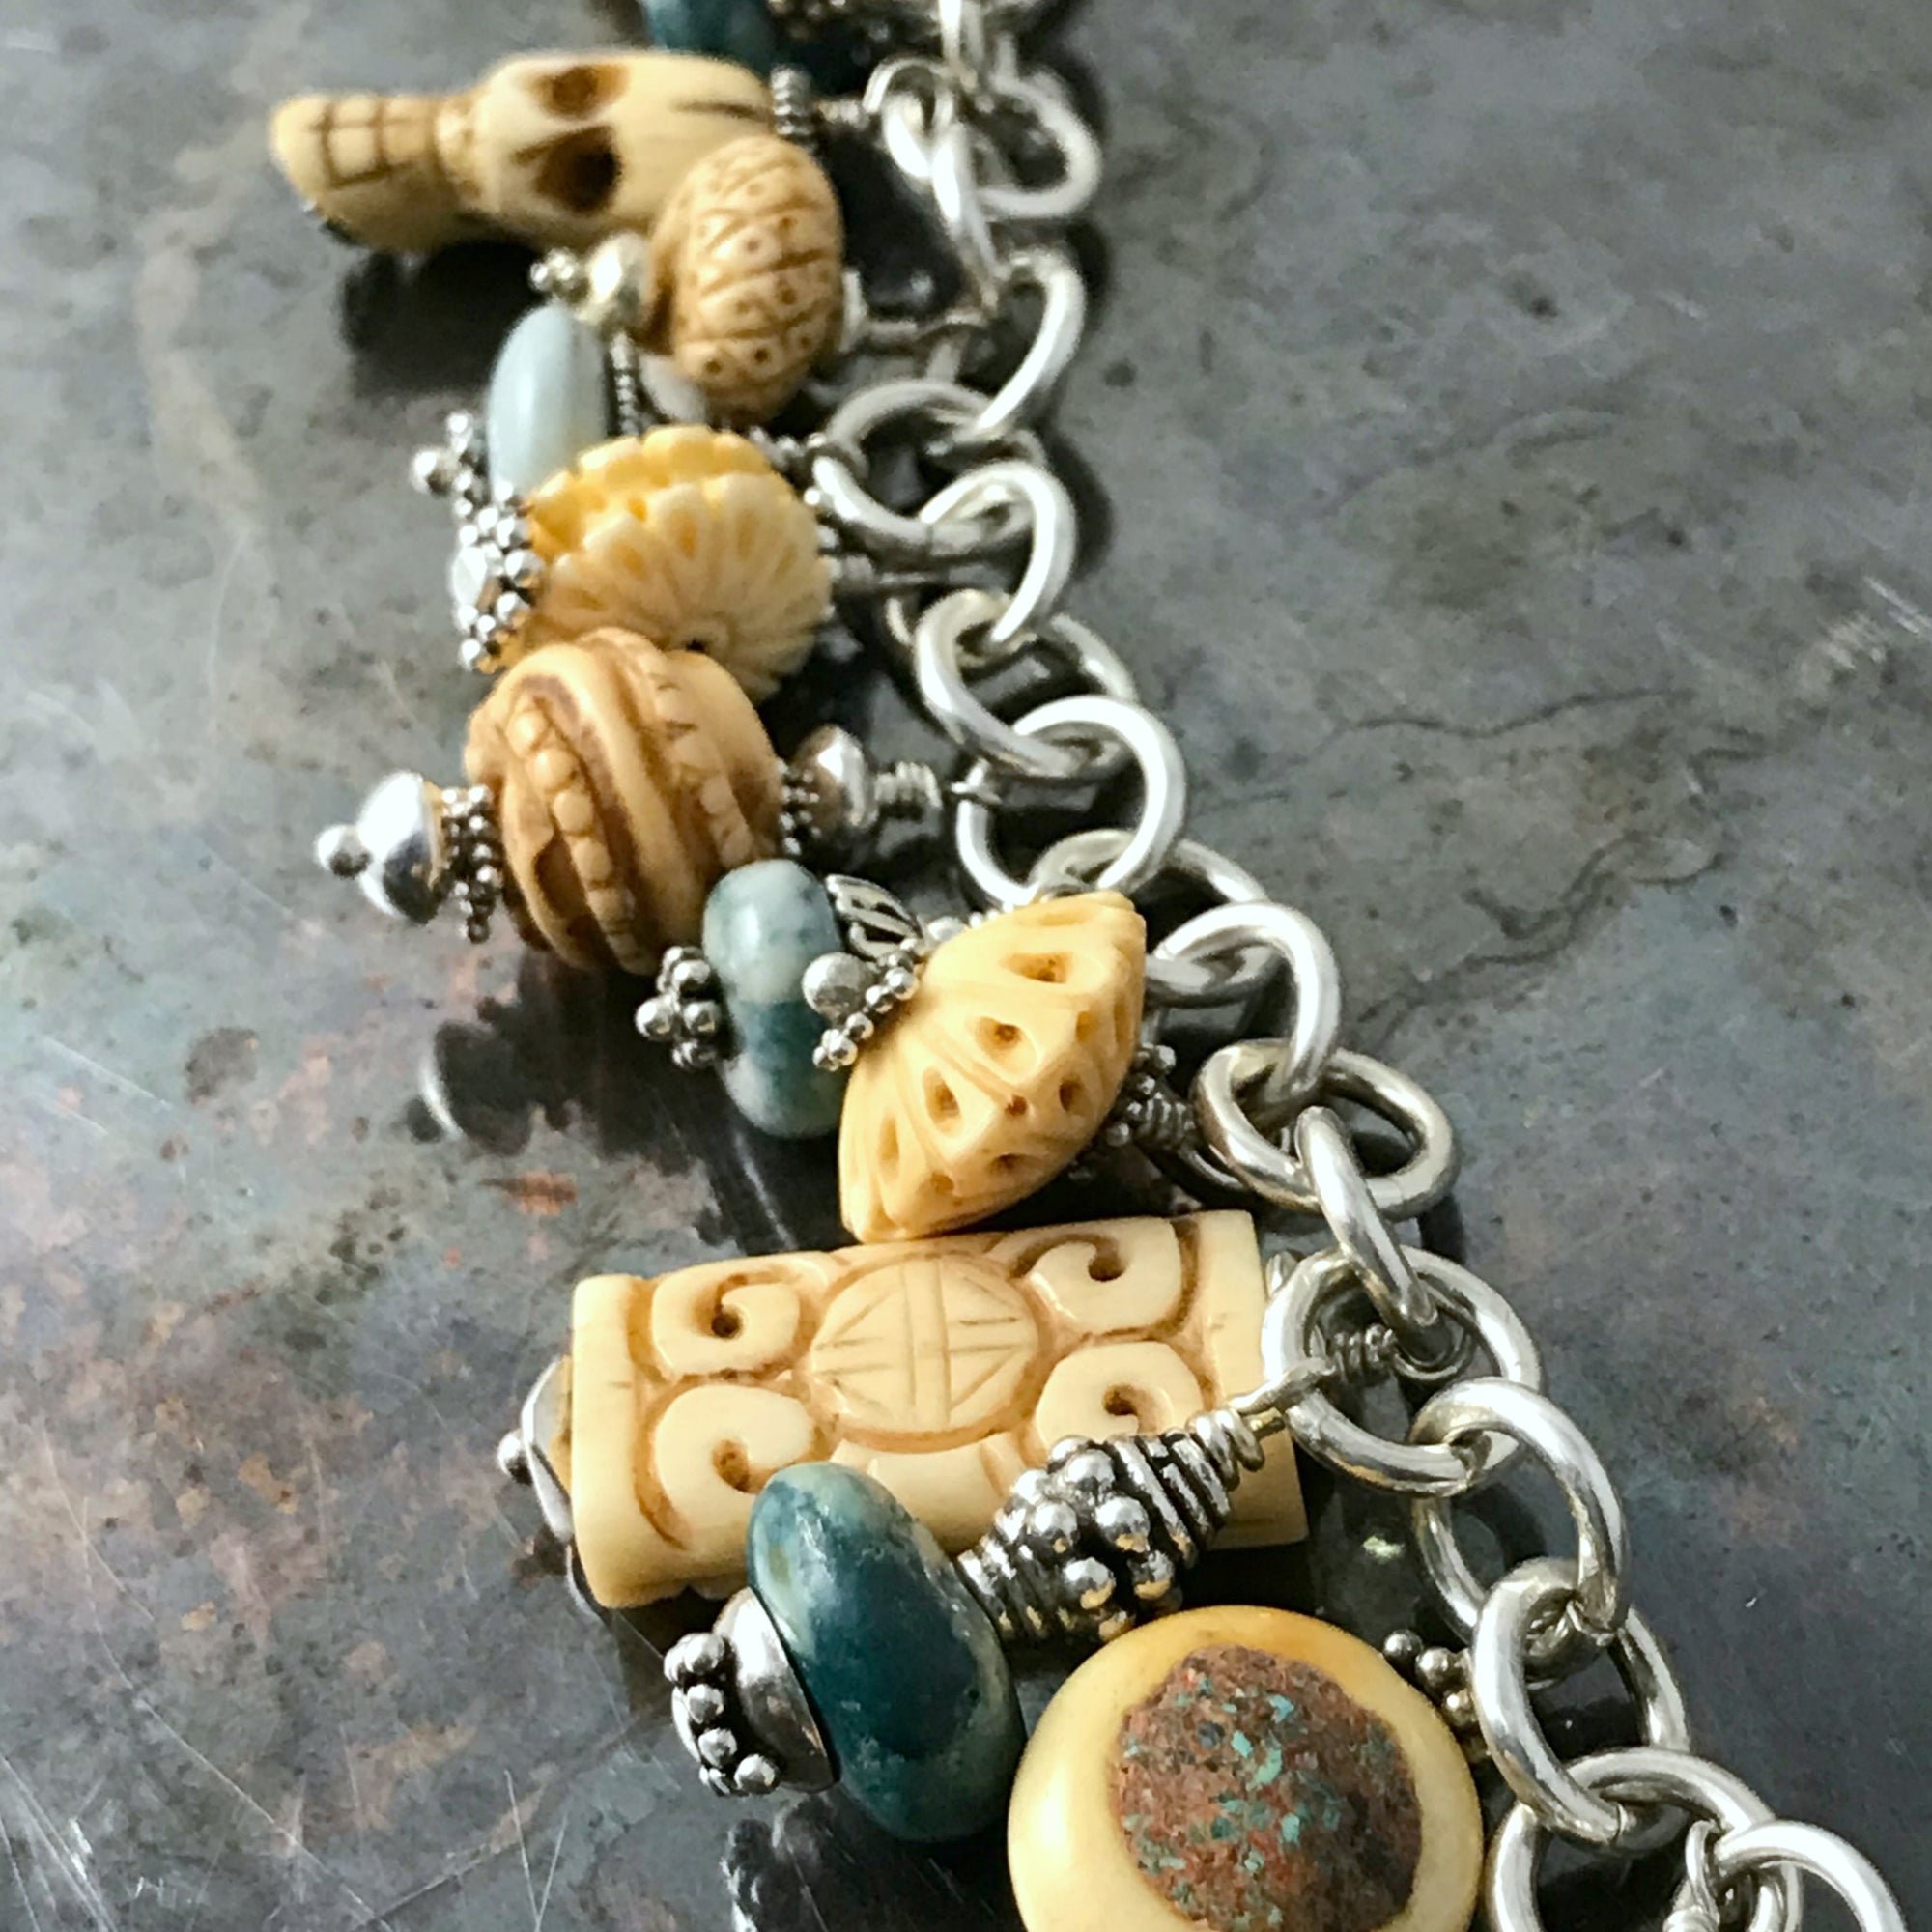 Available at Suzie Q Studio - TURQUOISE AND CARVED BONE CHARM BRACELET. This Boho-style charm bracelet would look totally fab with denim! It features bead-charms made of exquisitely carved bone beads and turquoise stone beads that are embellished with sterling silver accents. Charms suspended from a chain of sterling silver 16 gauge rings and an over-sized lobster claw closure.